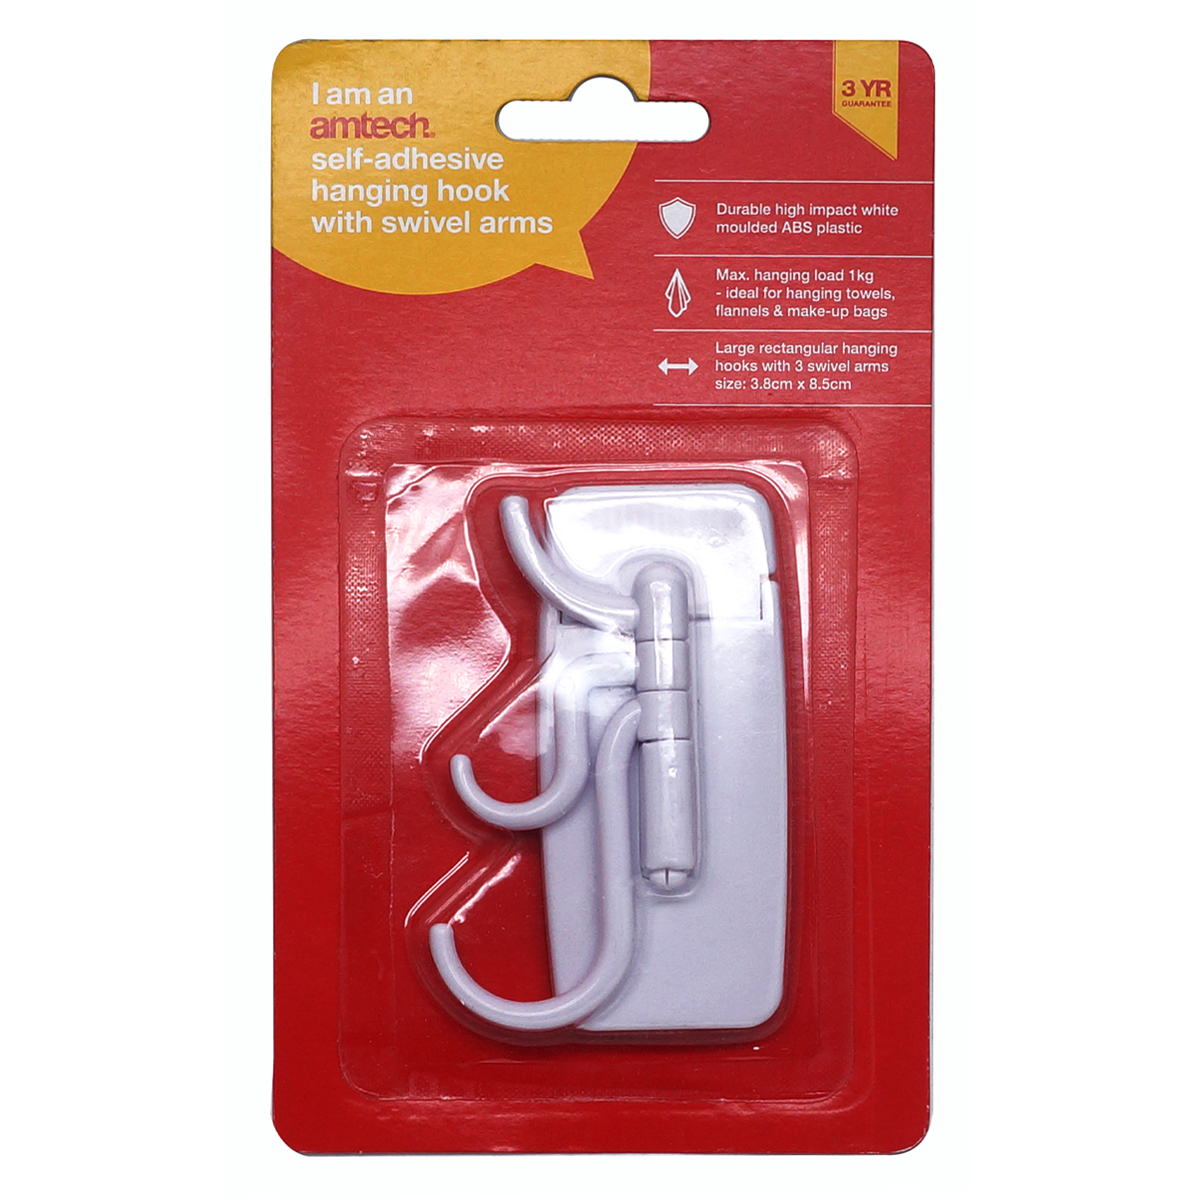 Amtech Self-Adhesive Hanging Hook With Swivel Arms